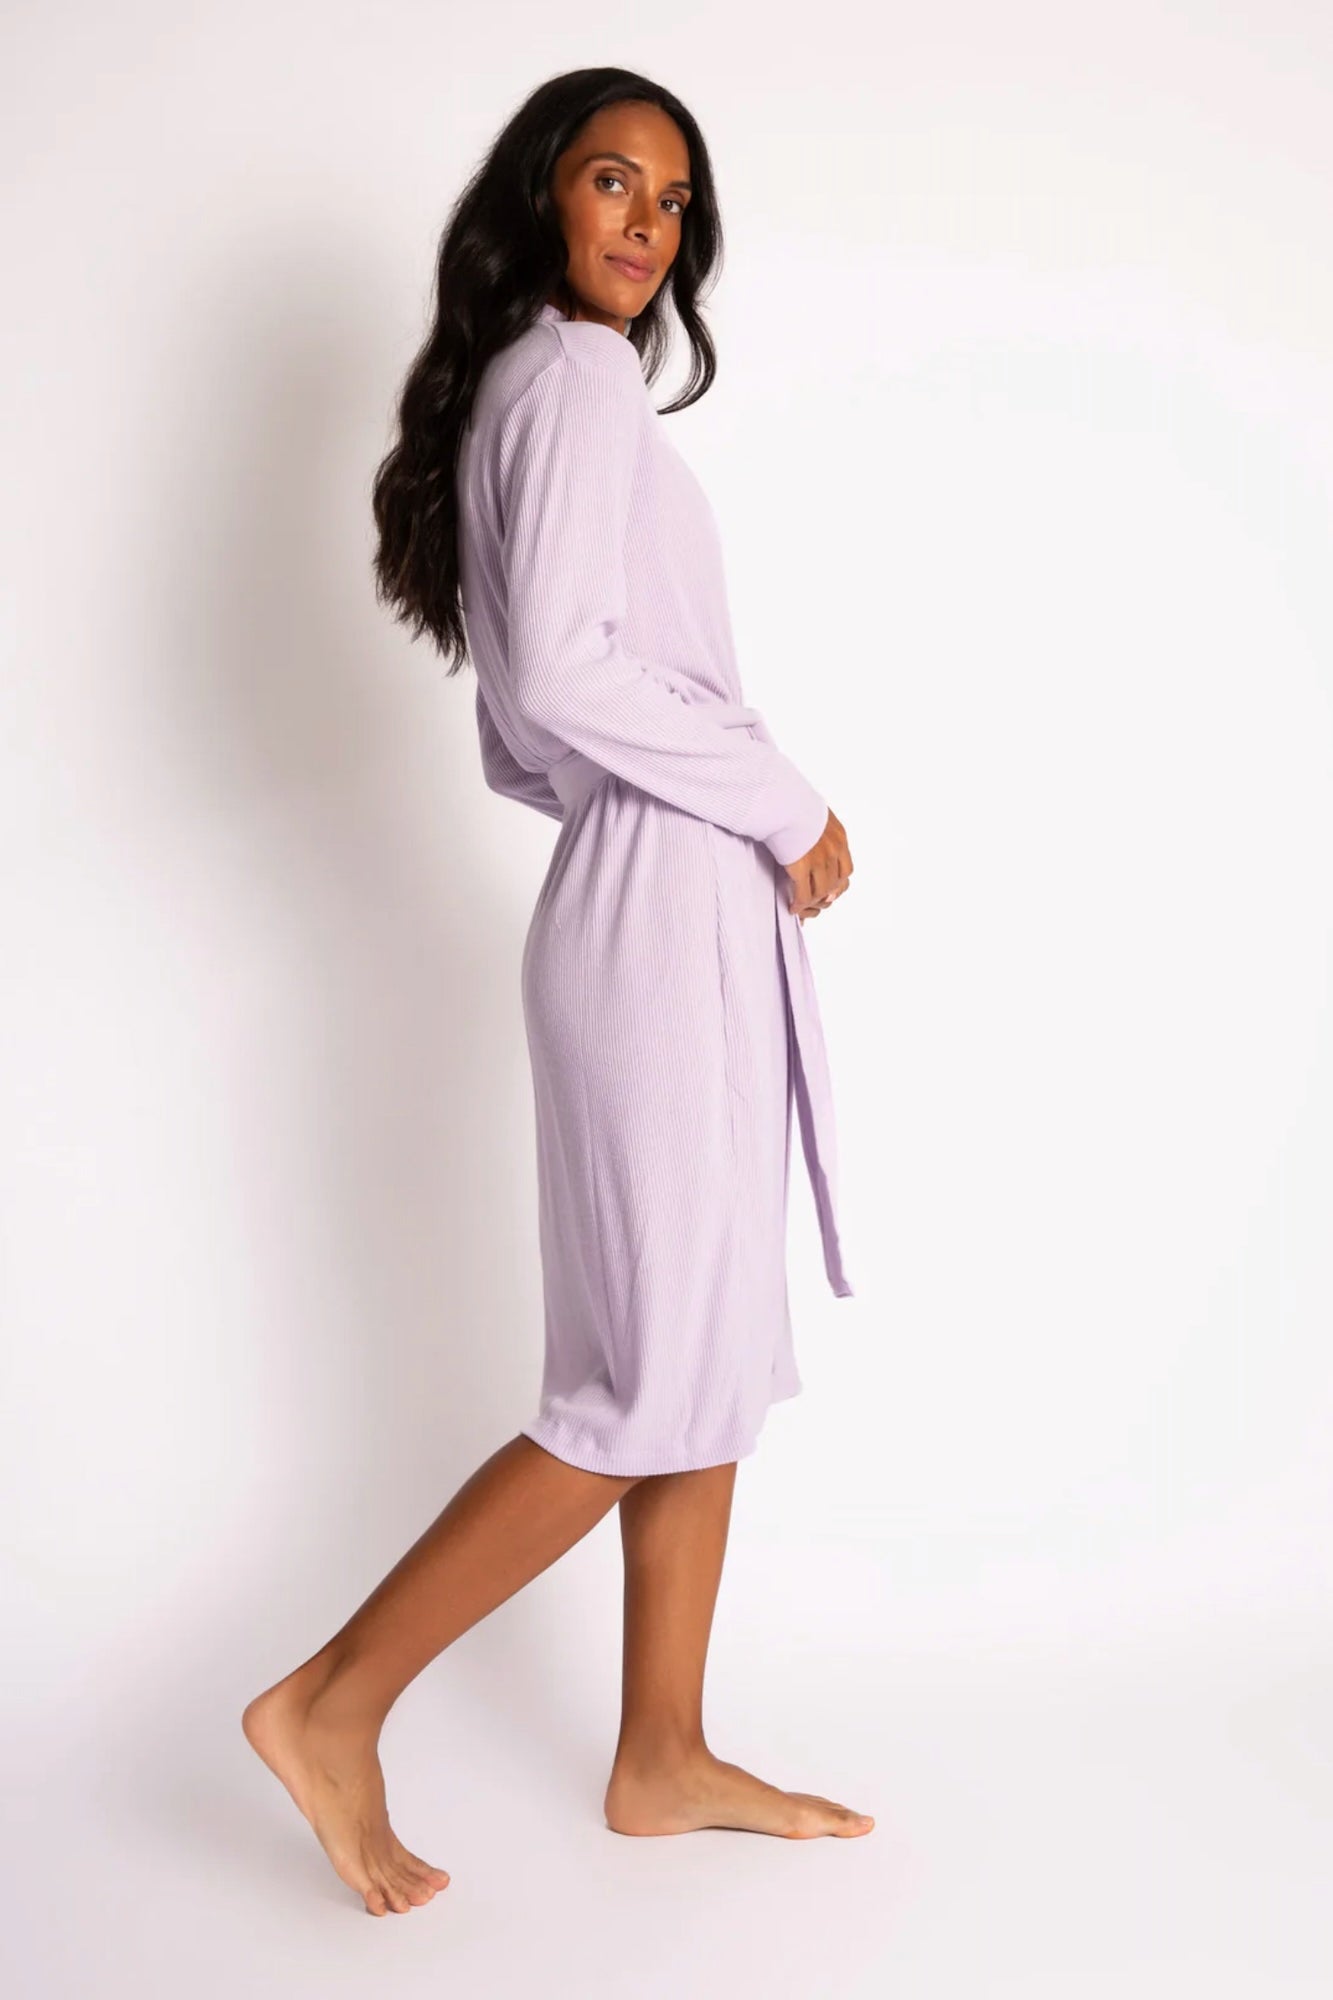 Textured Essentials robe - new spring color